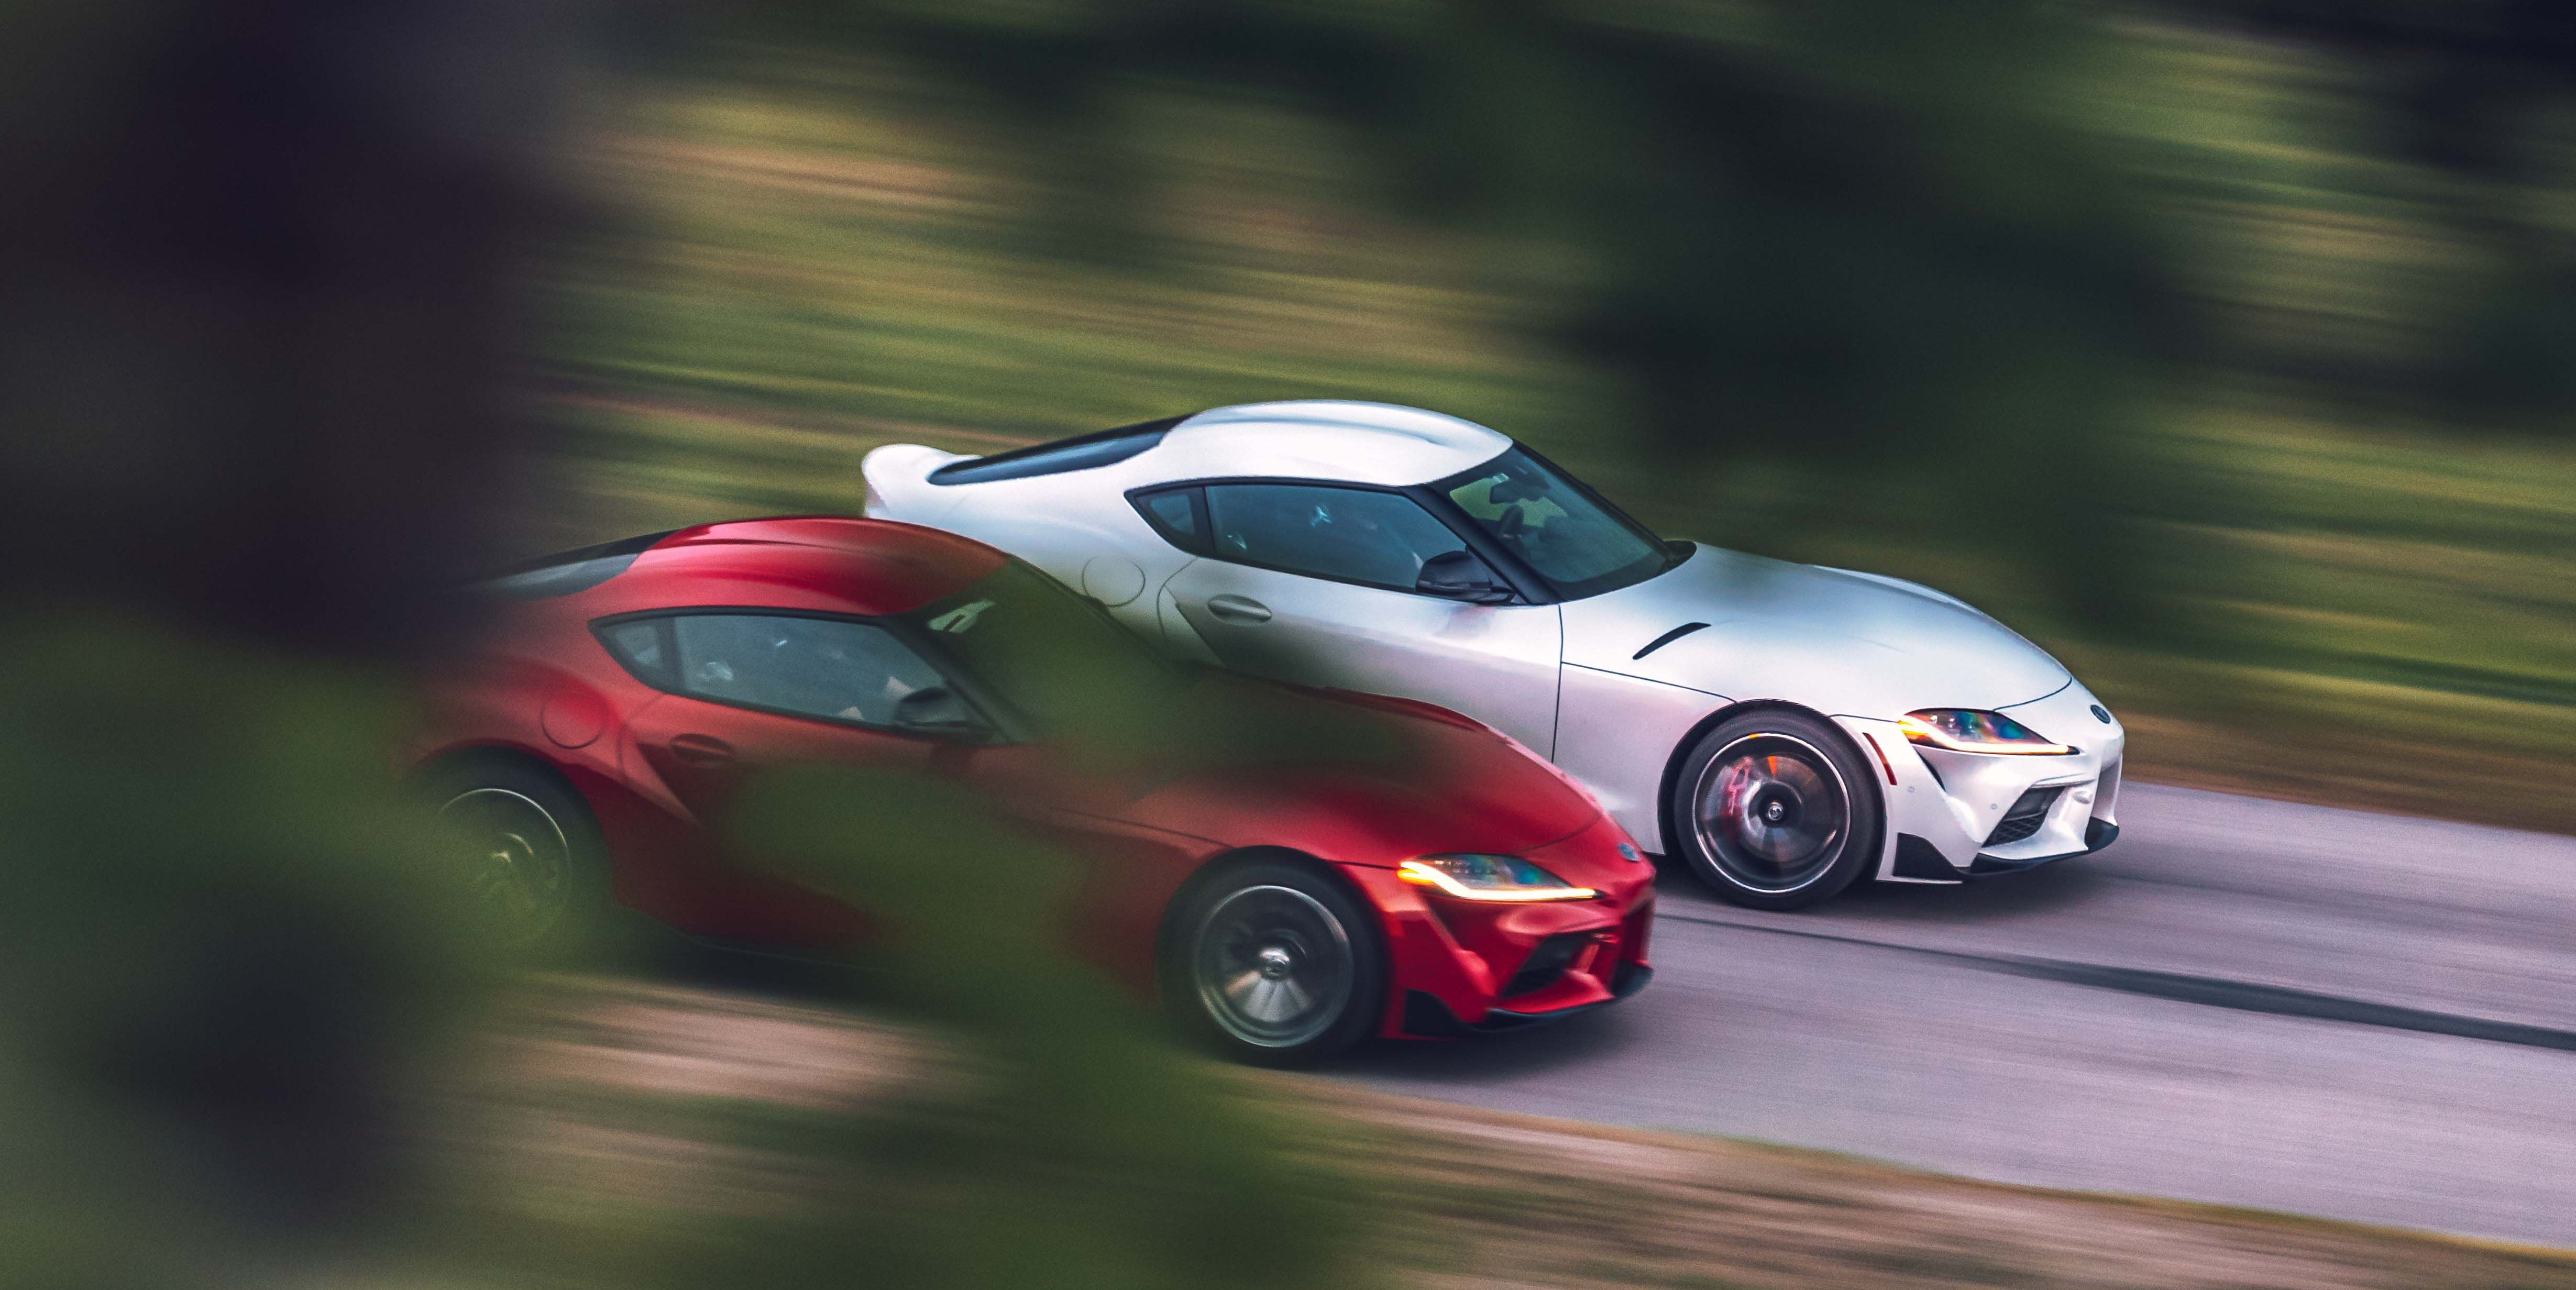 The Toyota Supra Is Almost Definitely Getting a Manual